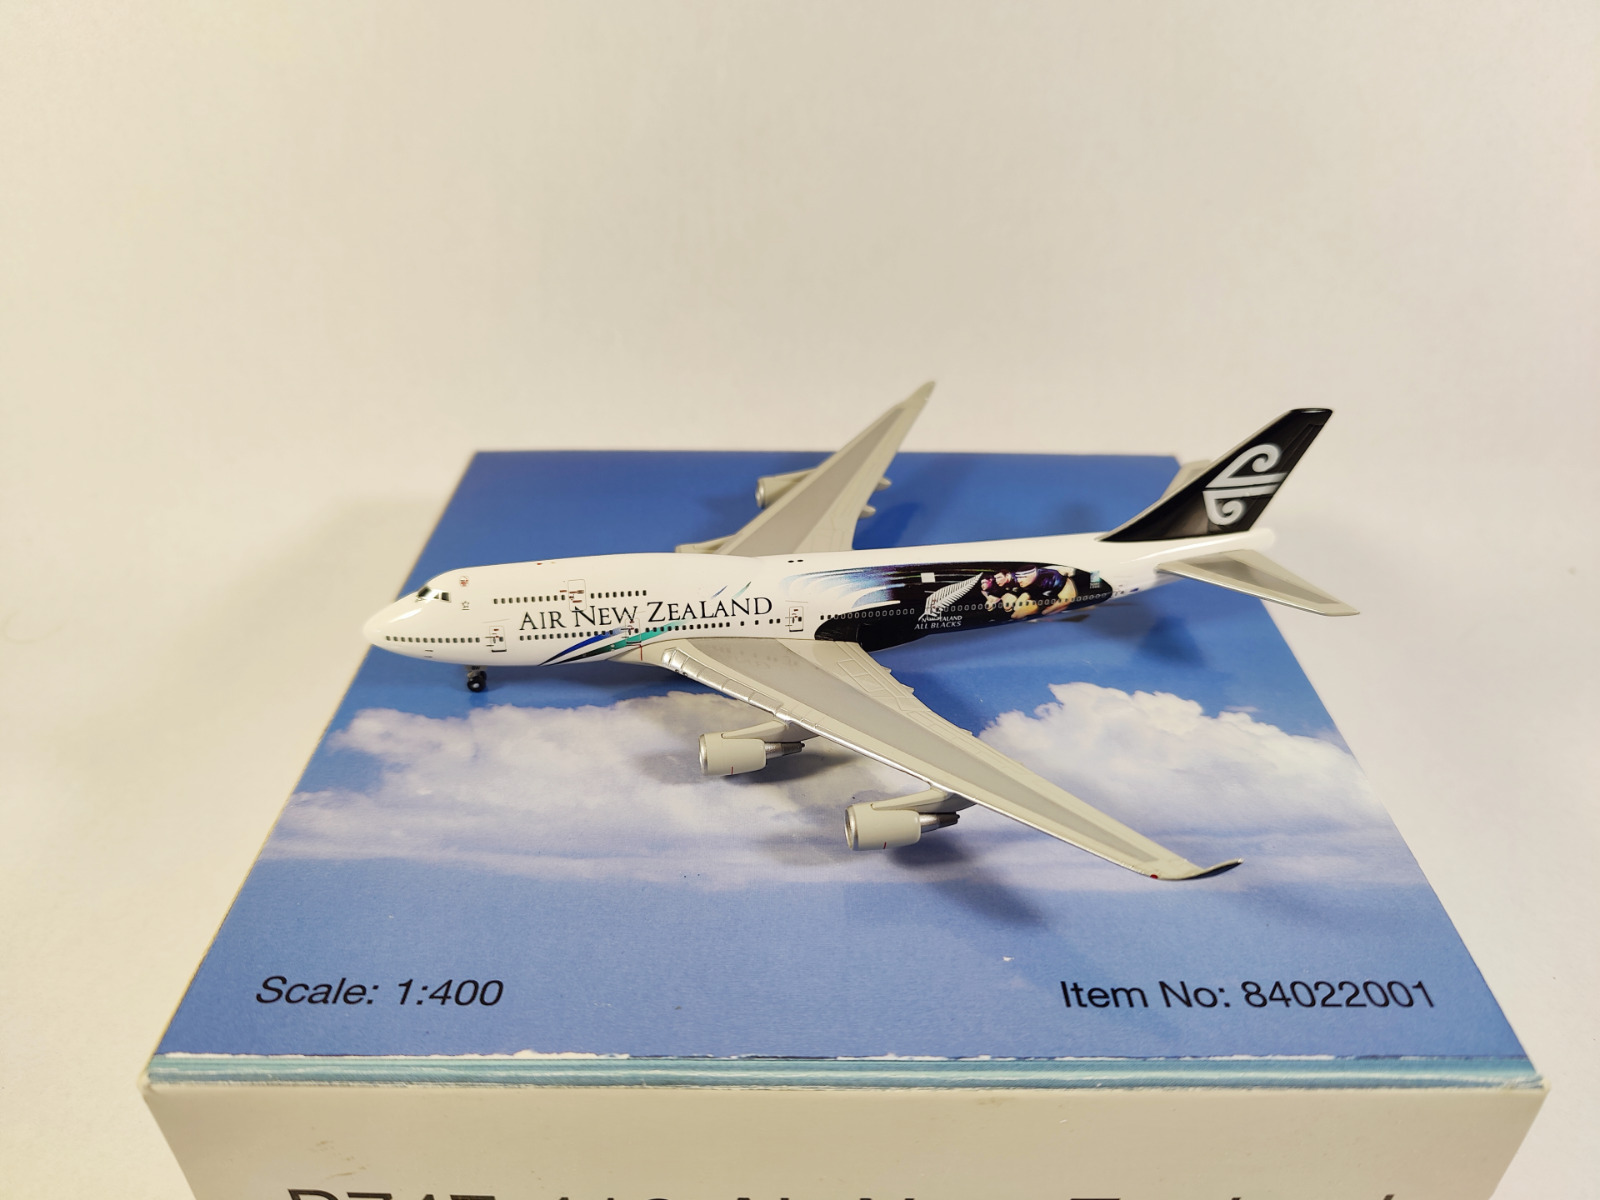 AIR NEW ZEALAND All Blacks Boeing 747-400 Aircraft Model 1:400 Scale Tucano Line